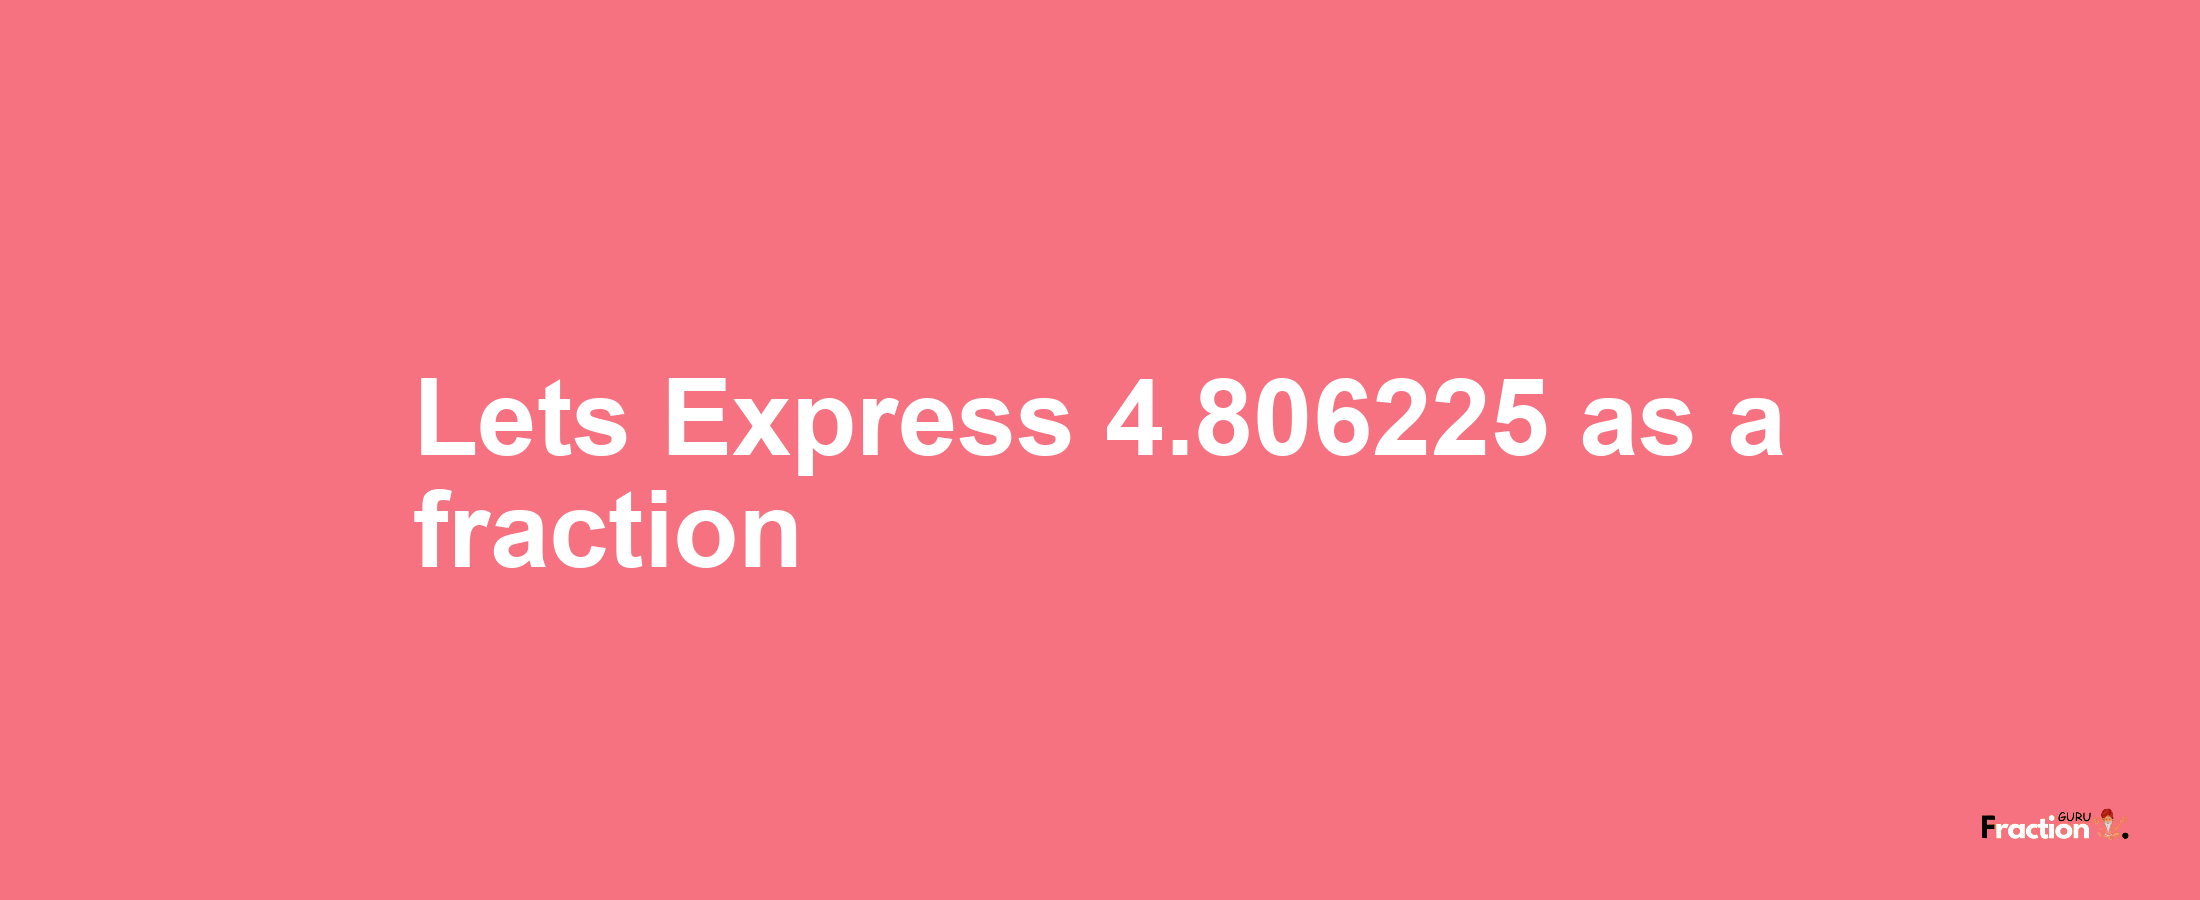 Lets Express 4.806225 as afraction